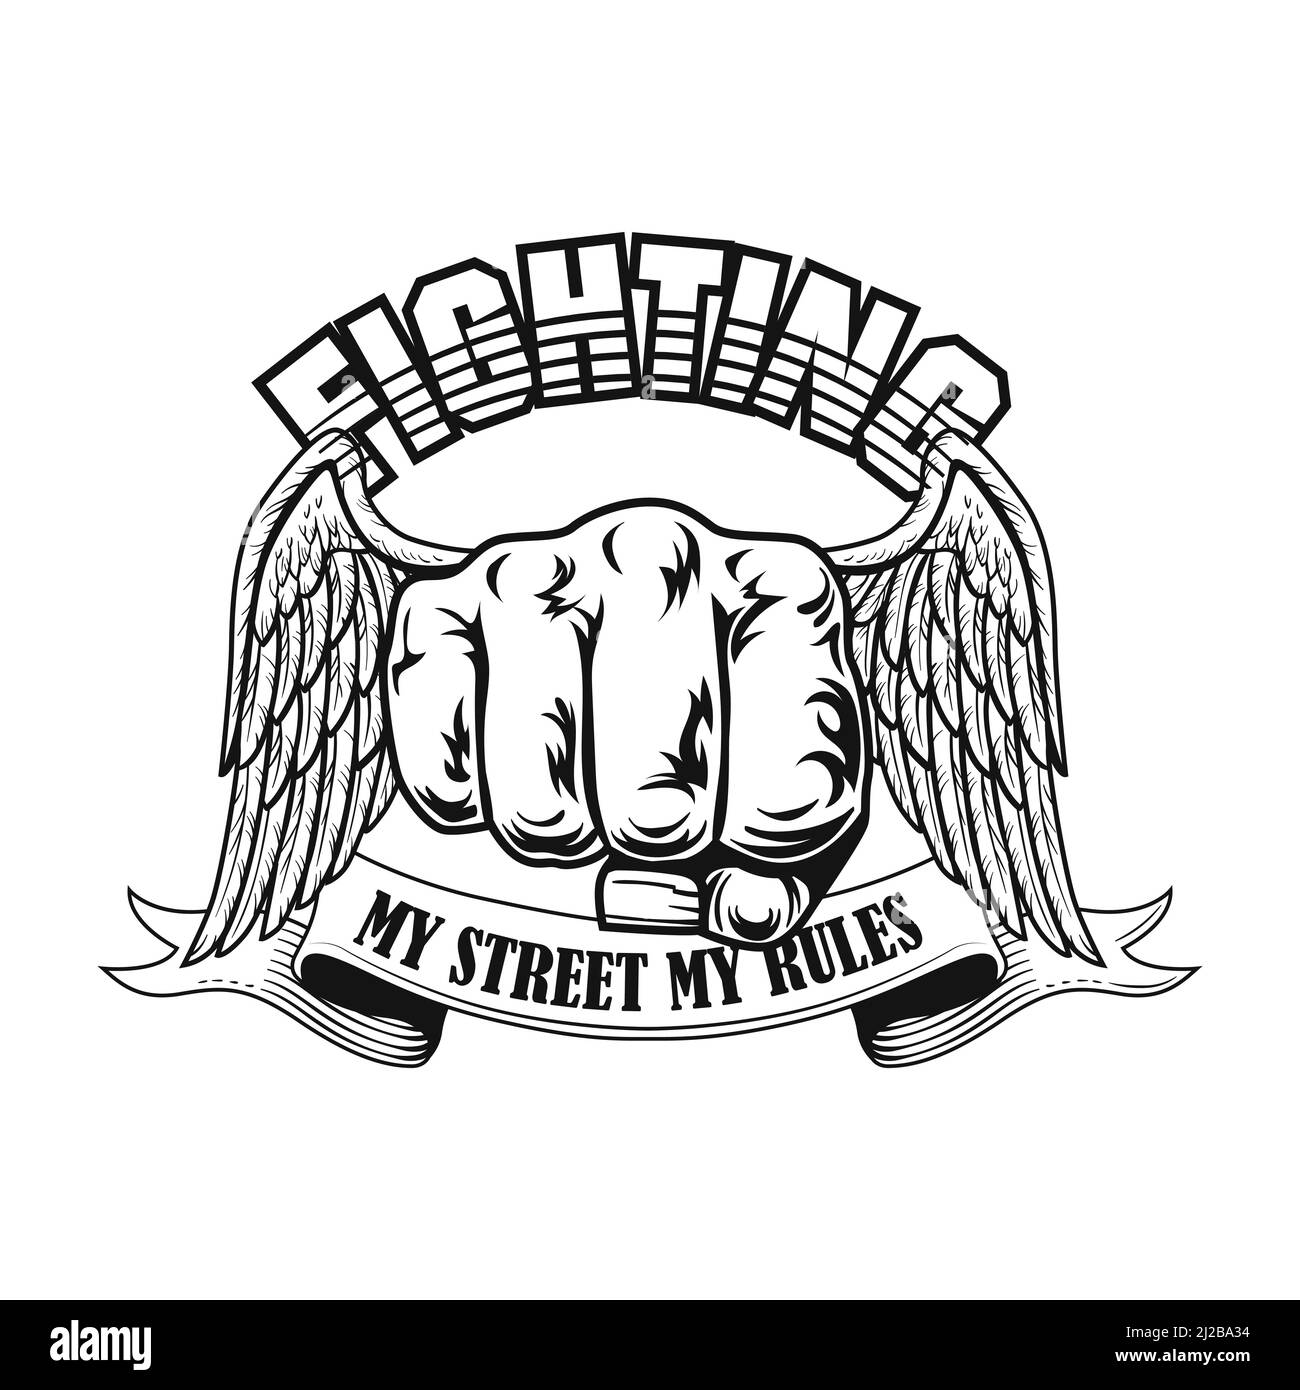 Street fighter badge vector illustration. Fists with wings, text on ribbon. Lifestyle concept for fight club emblem or gangsta tattoo templates Stock Vector